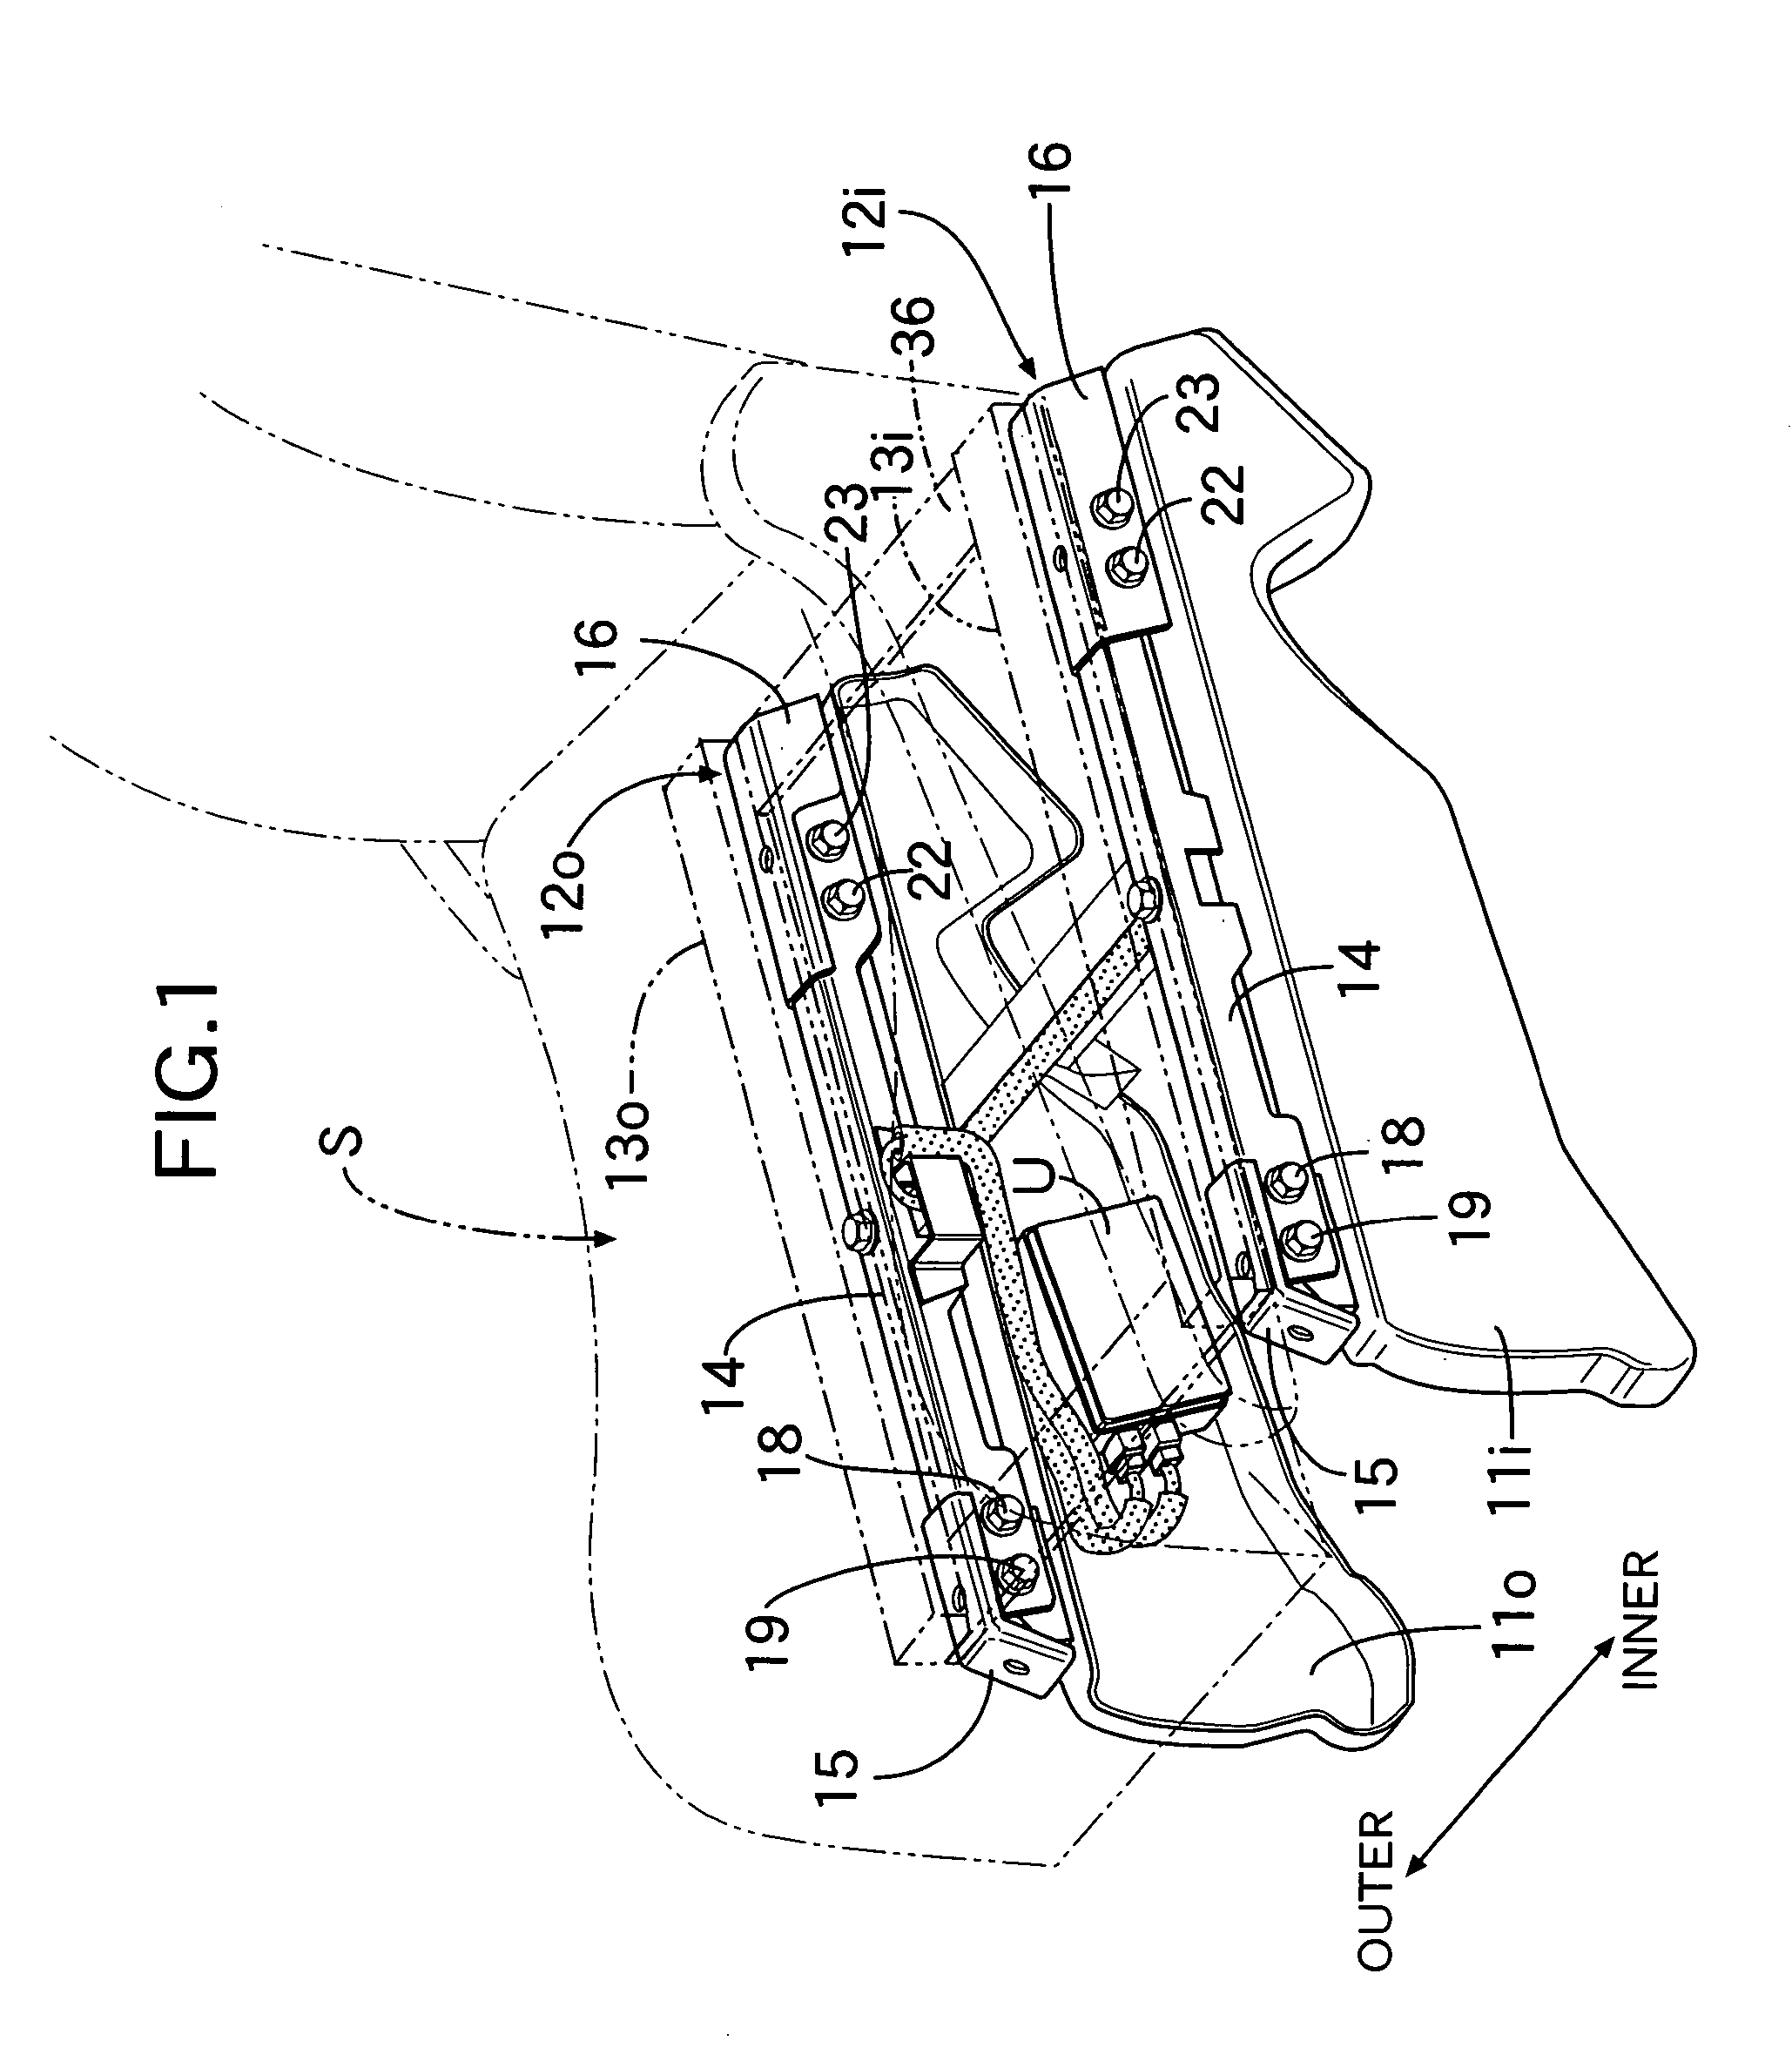 Occupant weight detection system having linked weight detection means with maintained positional relationships